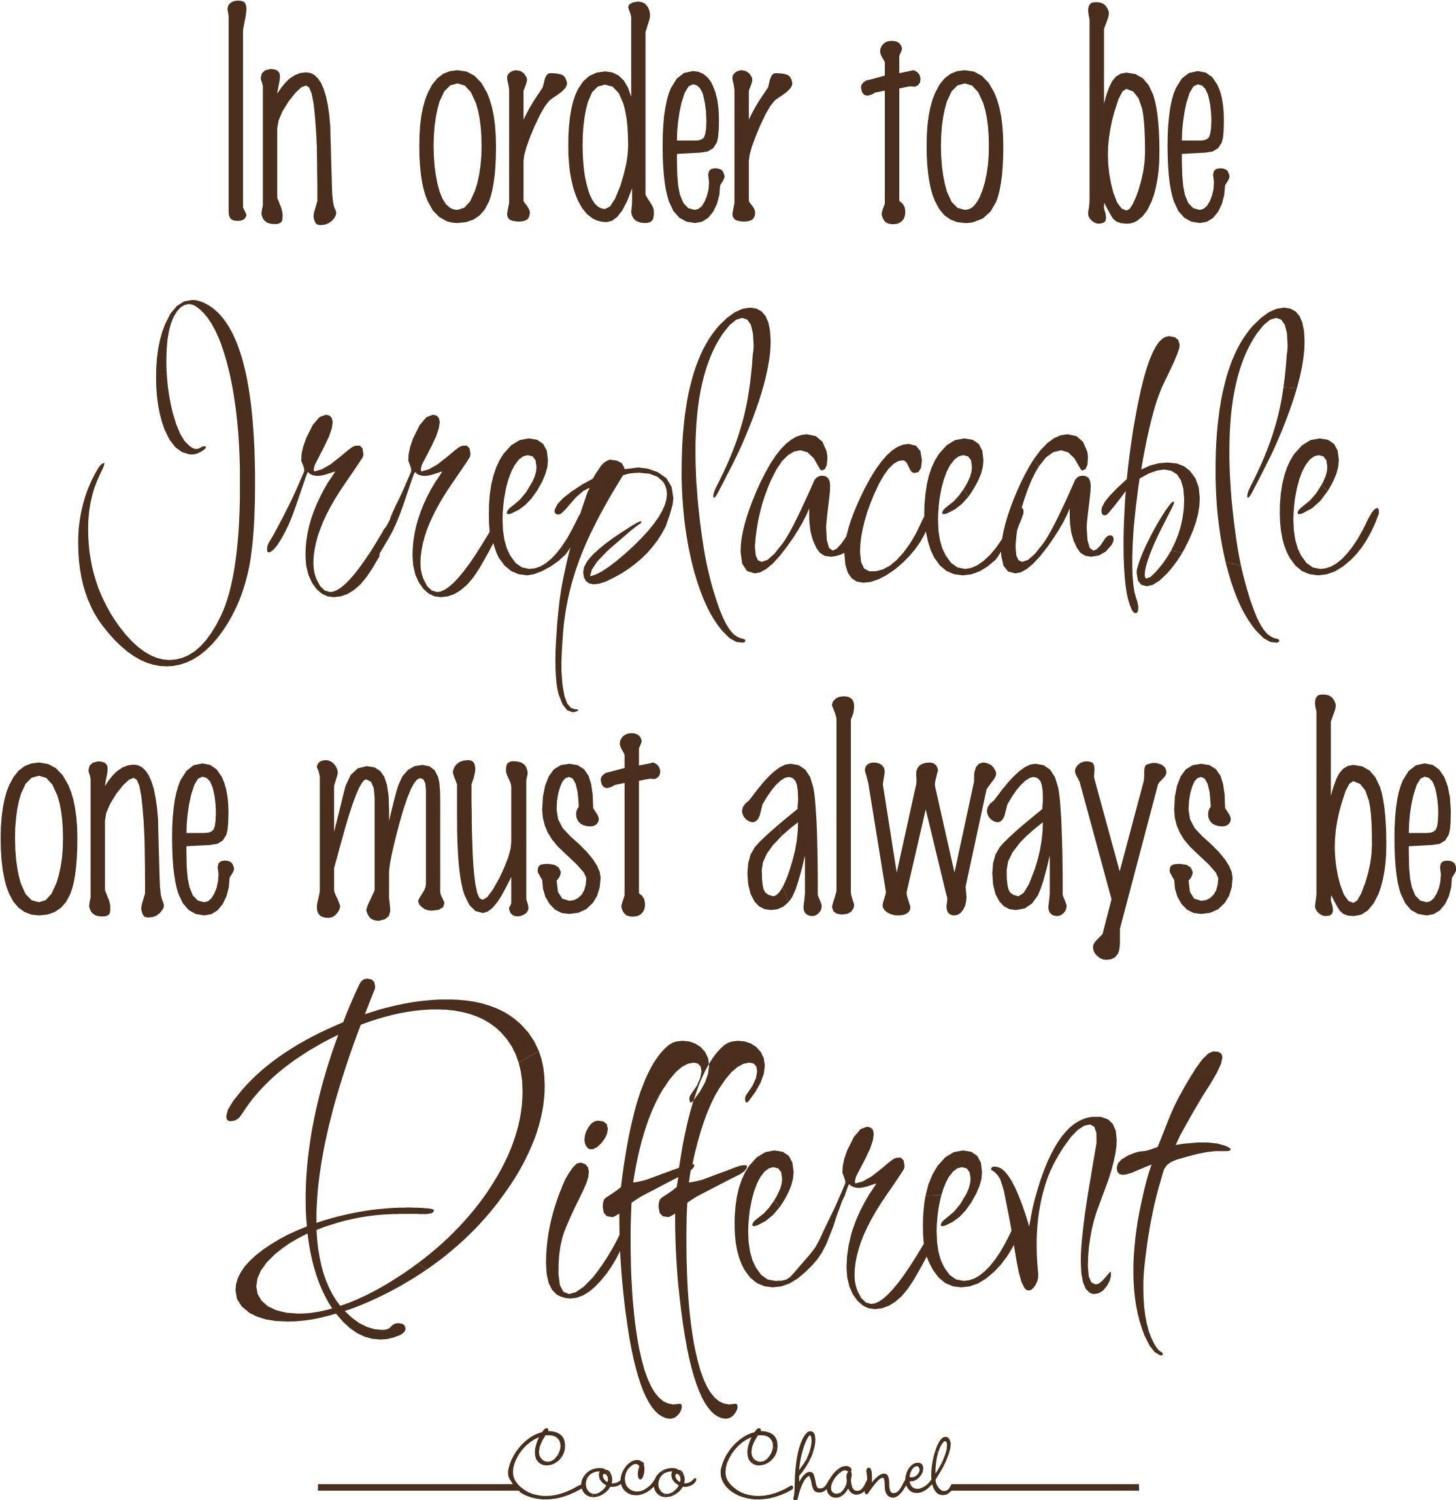 In order to be irreplaceable one must always be different…